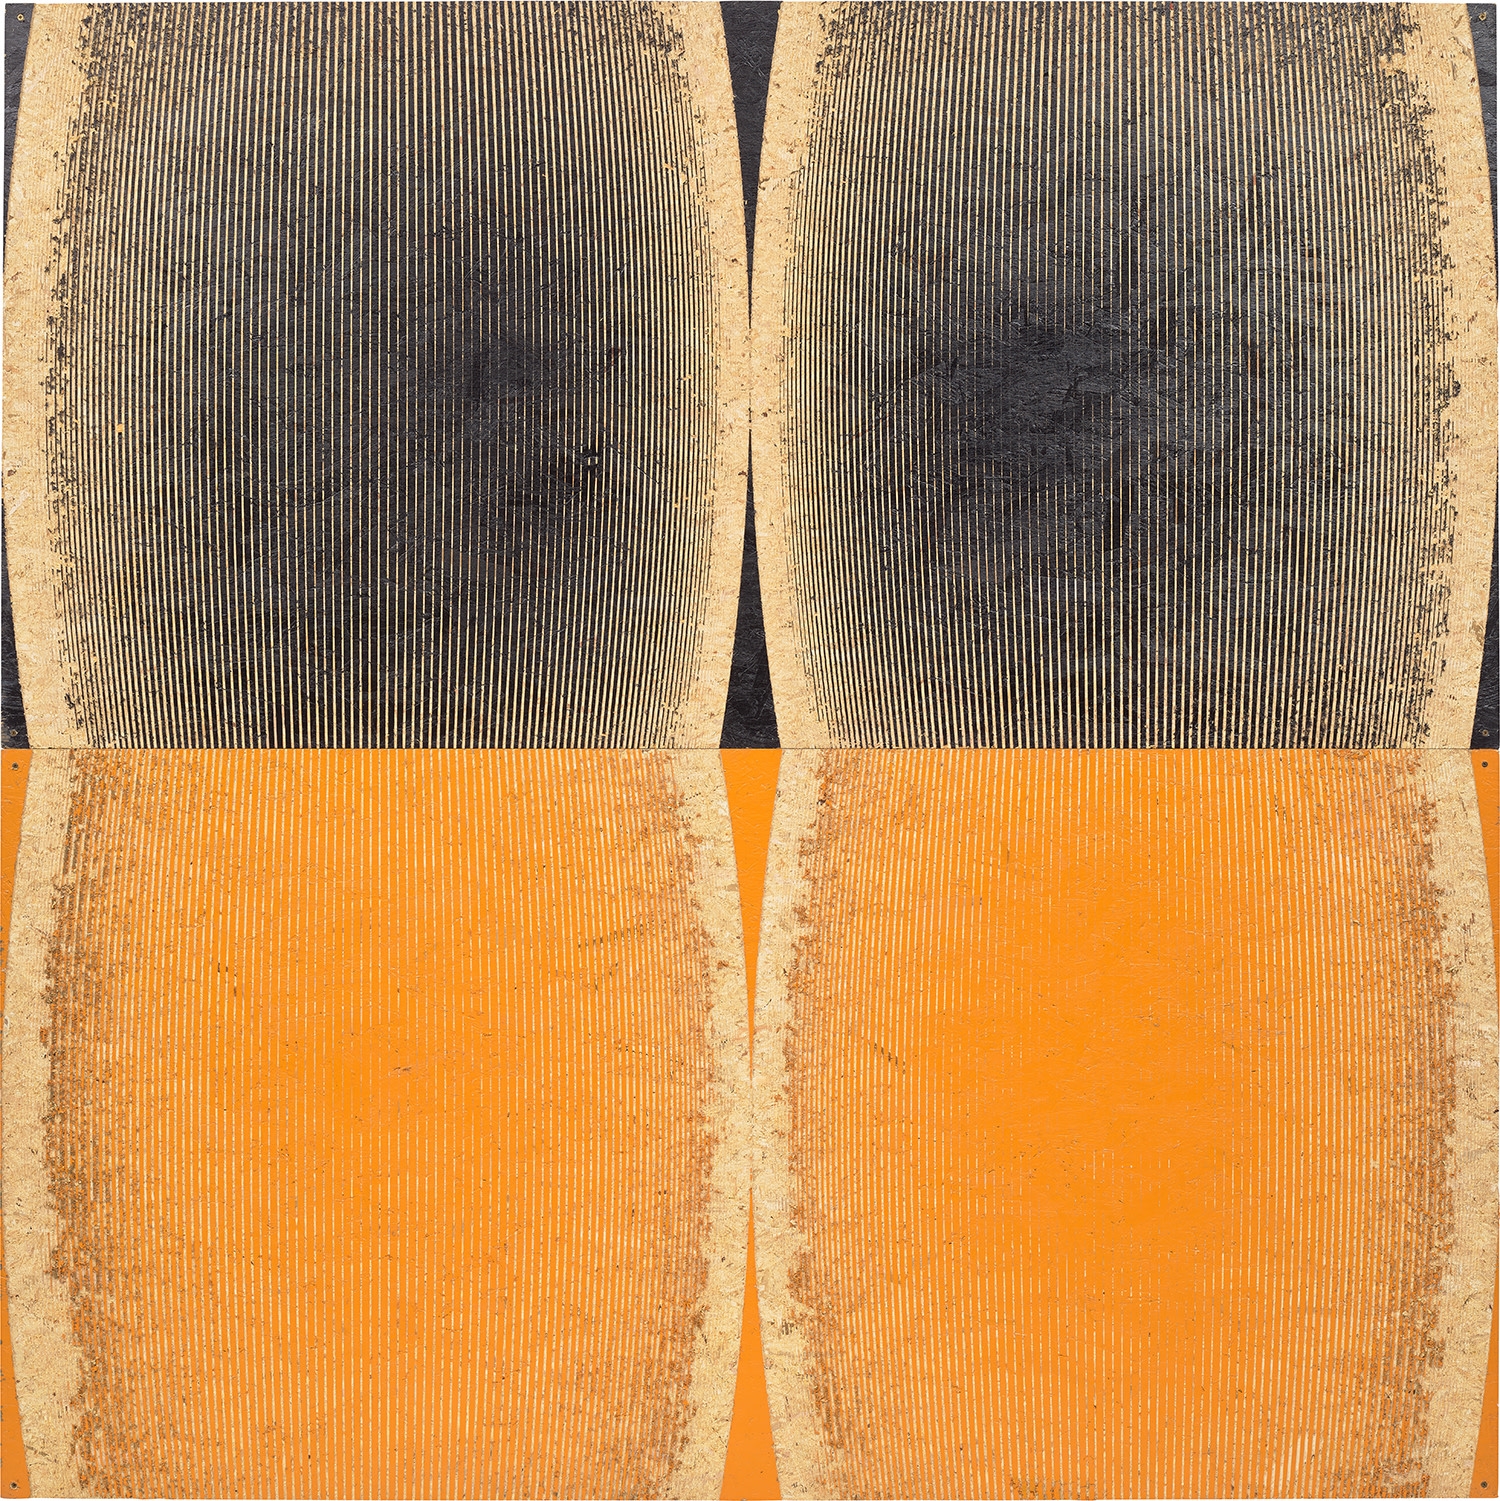 Untitled (Black Orange) by Michael DeLucia, Painted in 2011